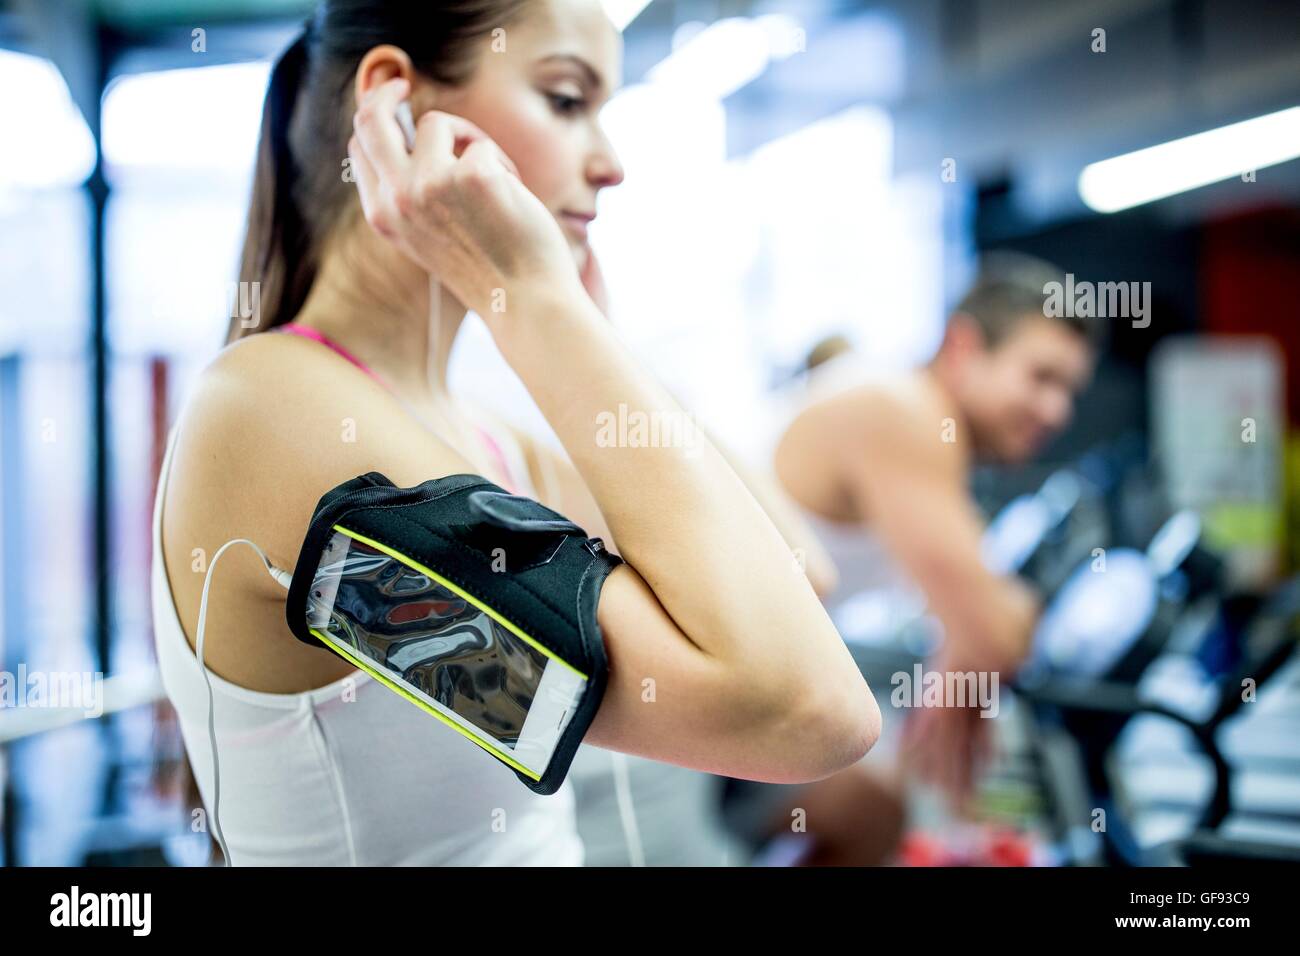 PROPERTY RELEASED. MODEL RELEASED. Young woman wearing arm band adjusting headphones in gym. Stock Photo